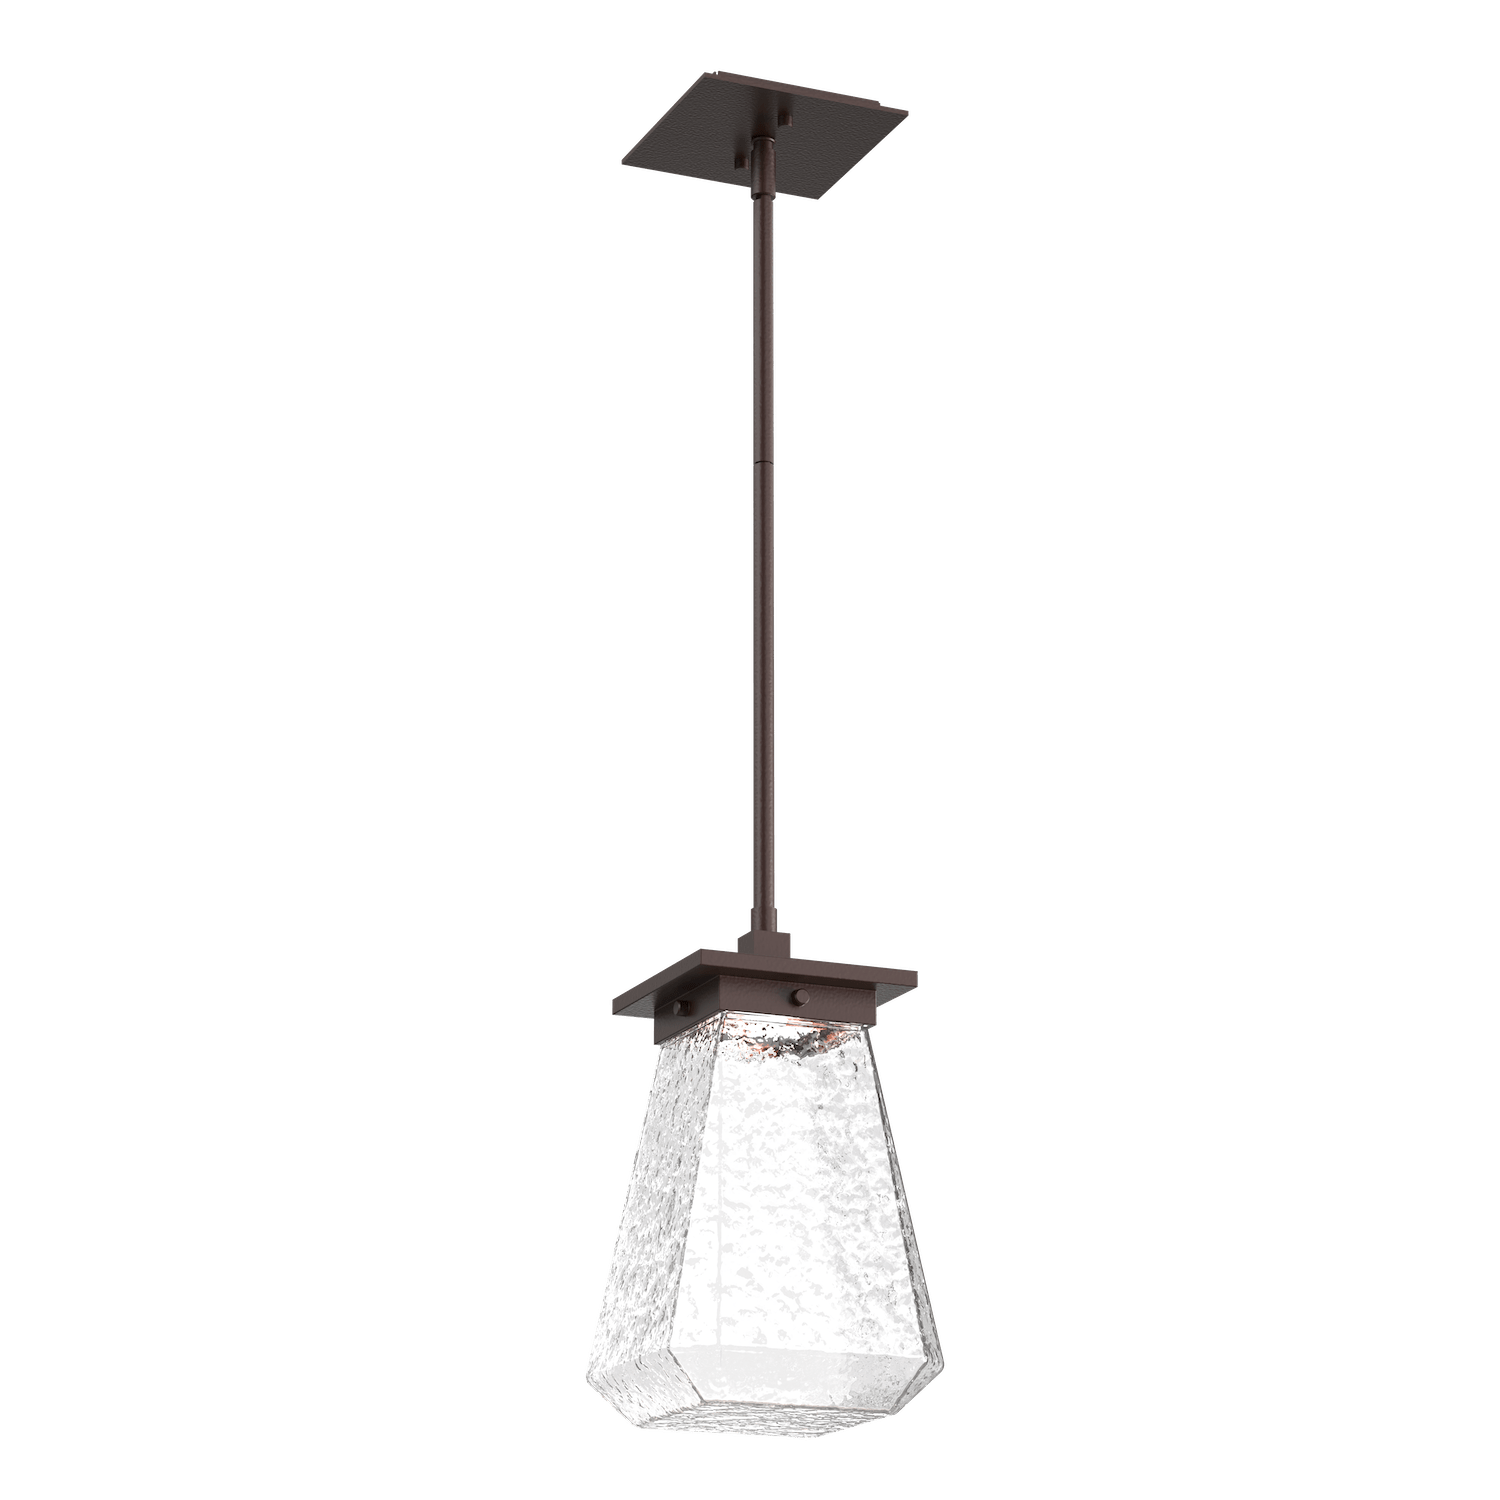 OPB0043-AH-SB-C-Hammerton-Studio-Beacon-14-inch-outdoor-pendant-light-with-statuary-bronze-finish-and-clear-blown-glass-shades-and-LED-lamping